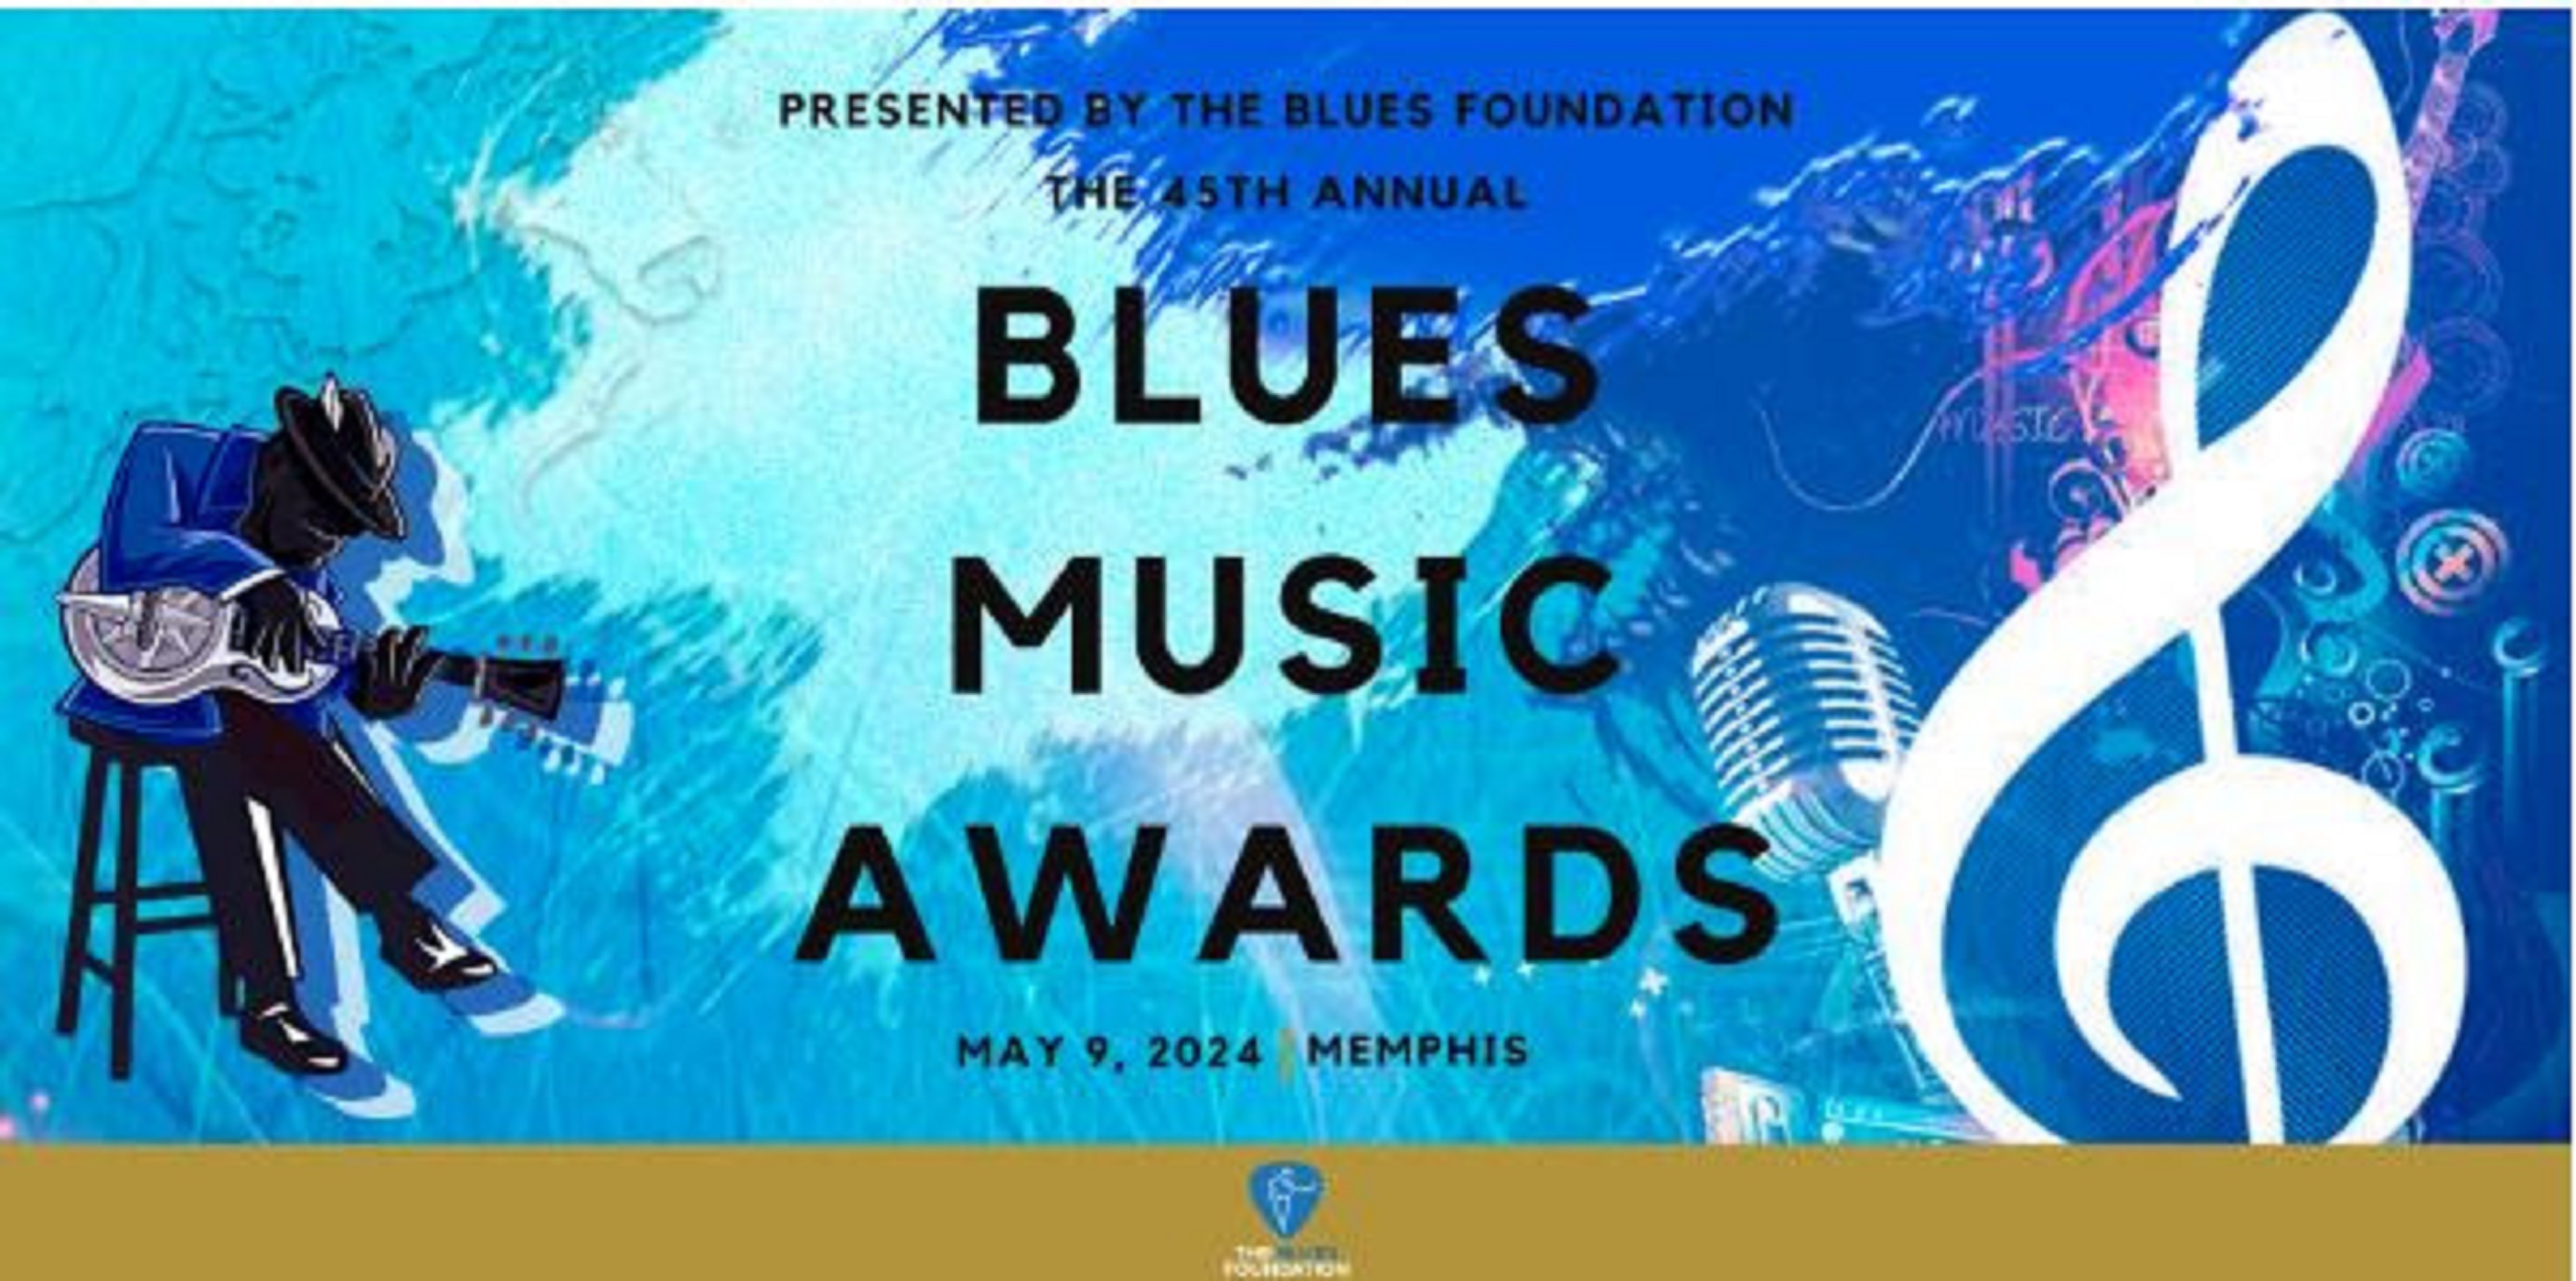 The Blues Foundation Announces the 45th Annual Blues Music Awards Nominations